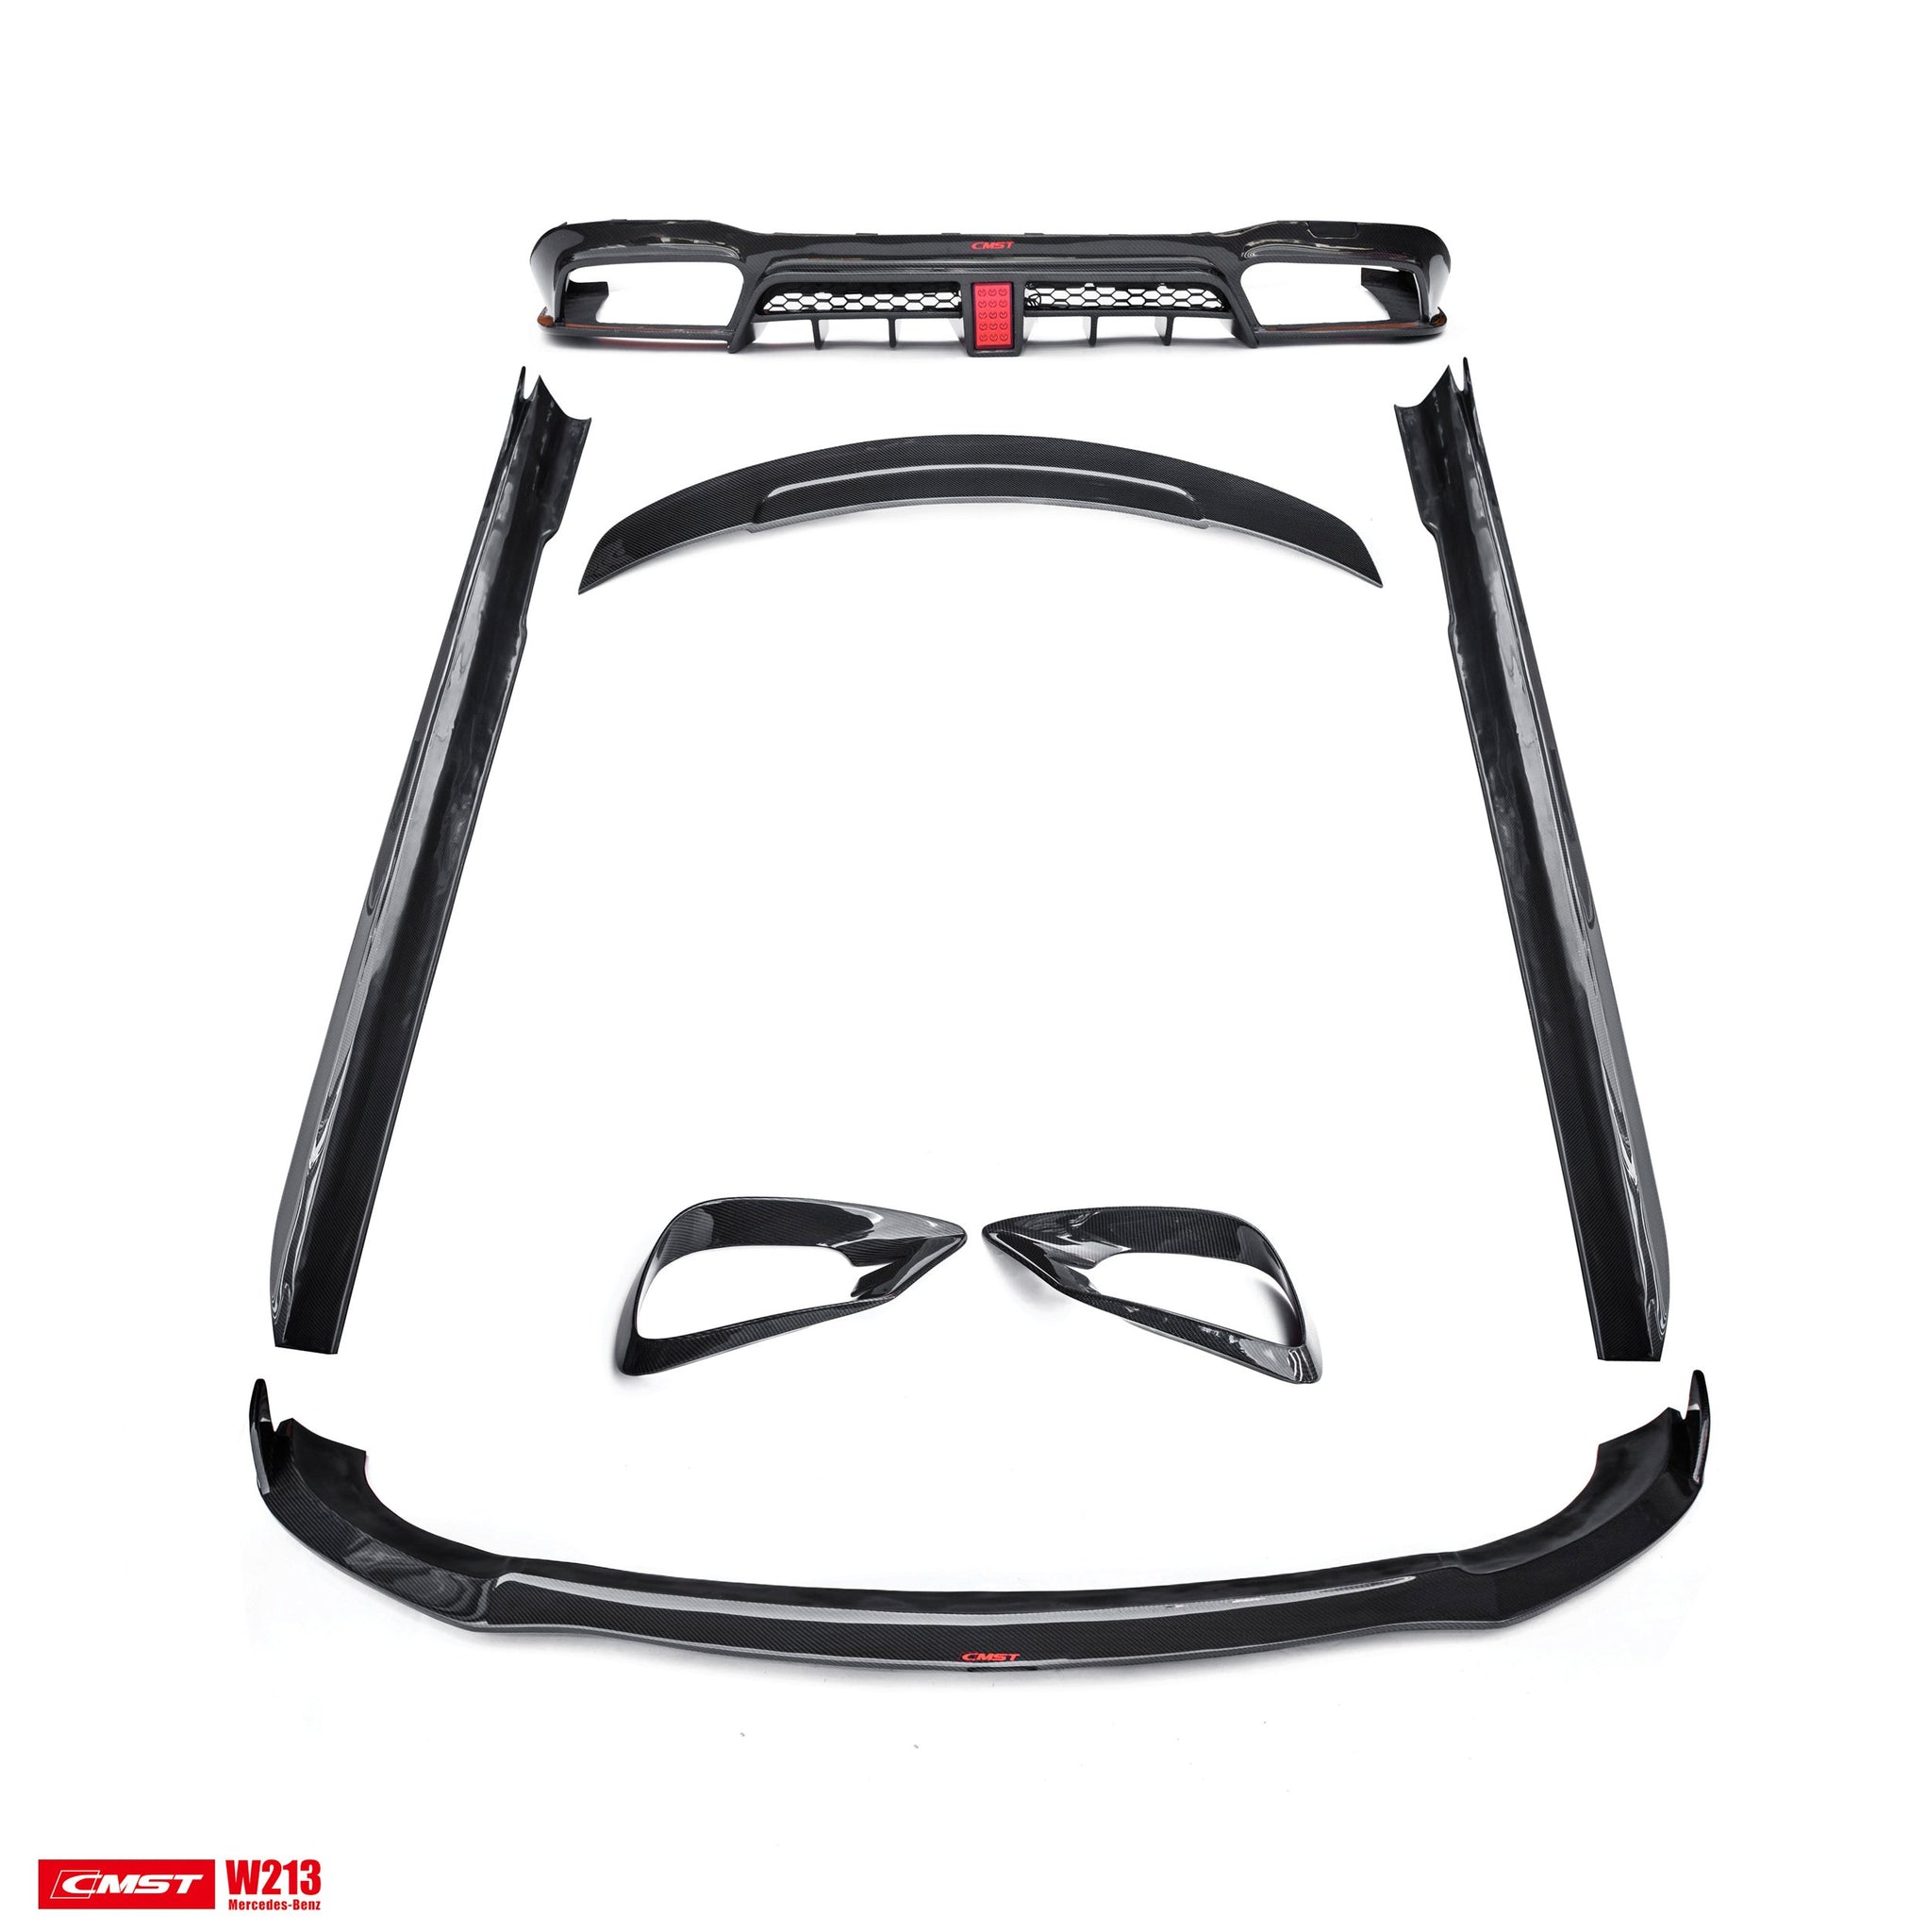 Check our price and buy CMST Carbon Fiber Body Kit set for Mercedes Benz E-class W213!